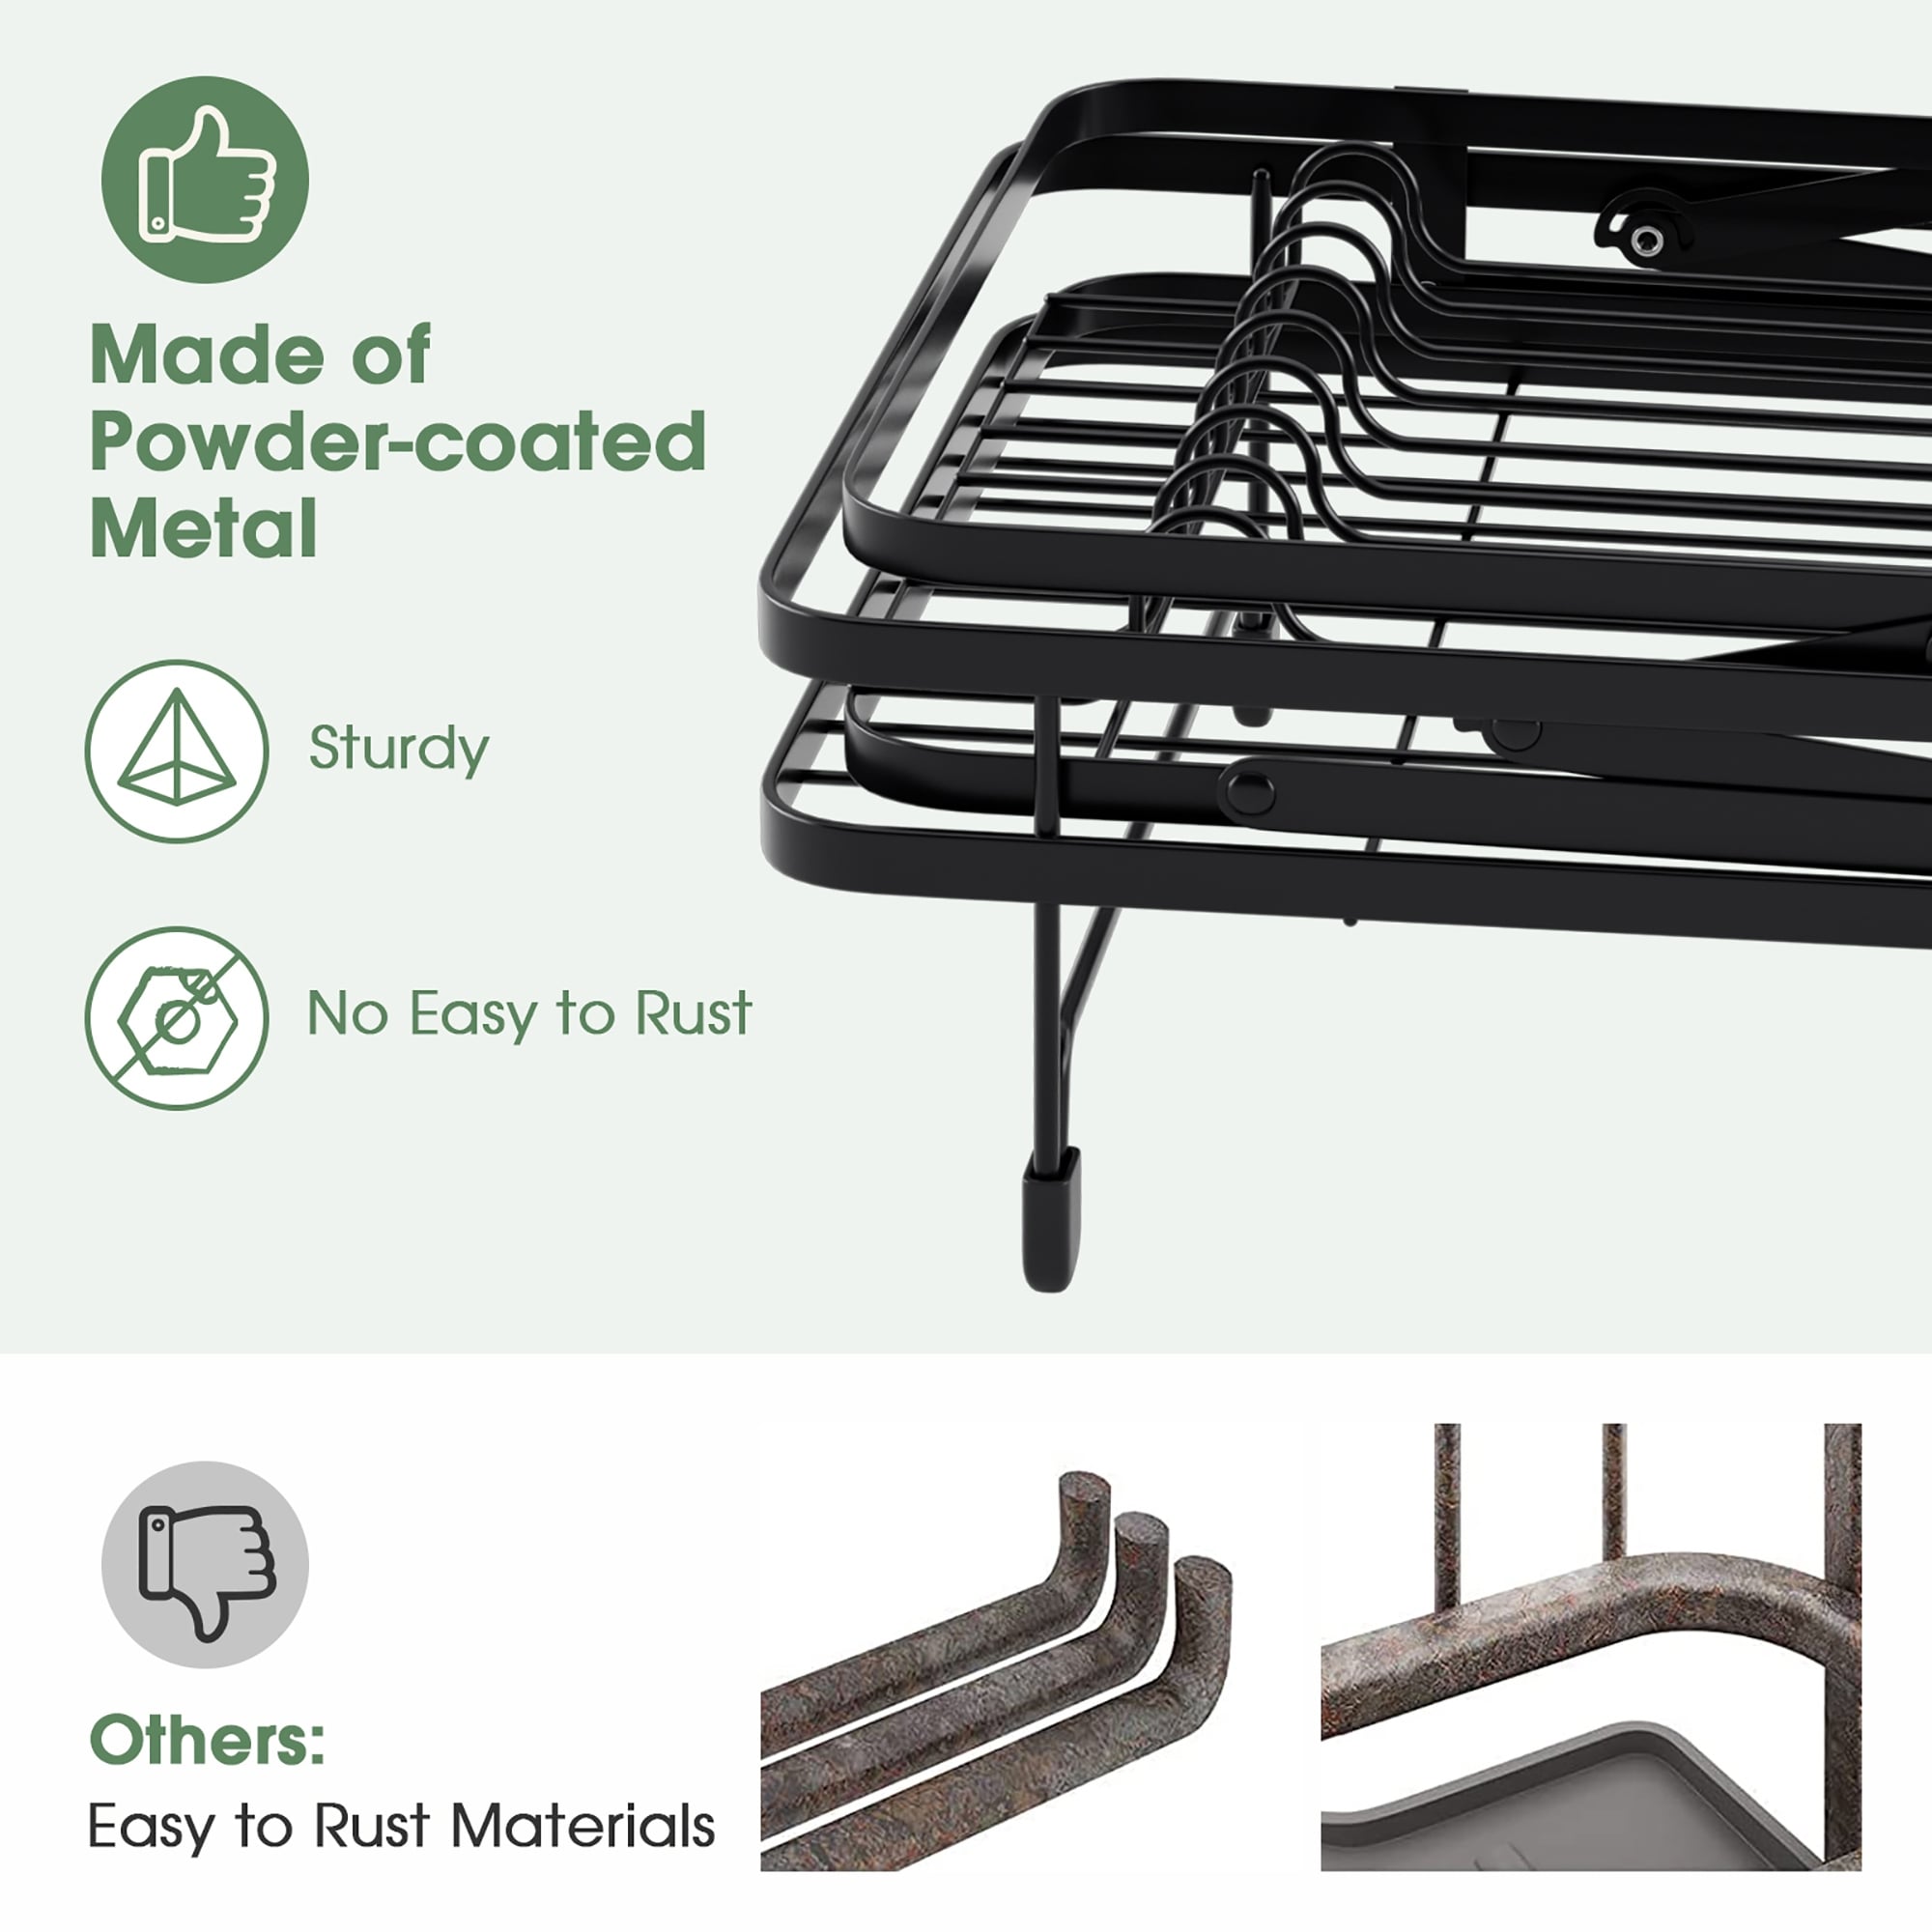 https://ak1.ostkcdn.com/images/products/is/images/direct/6269de8729f840cdea51a83a26e15c731c81d96e/Dish-Drying-Rack-Collapsible-2-Tier-Dish-Rack-and-Drainboard-Set.jpg